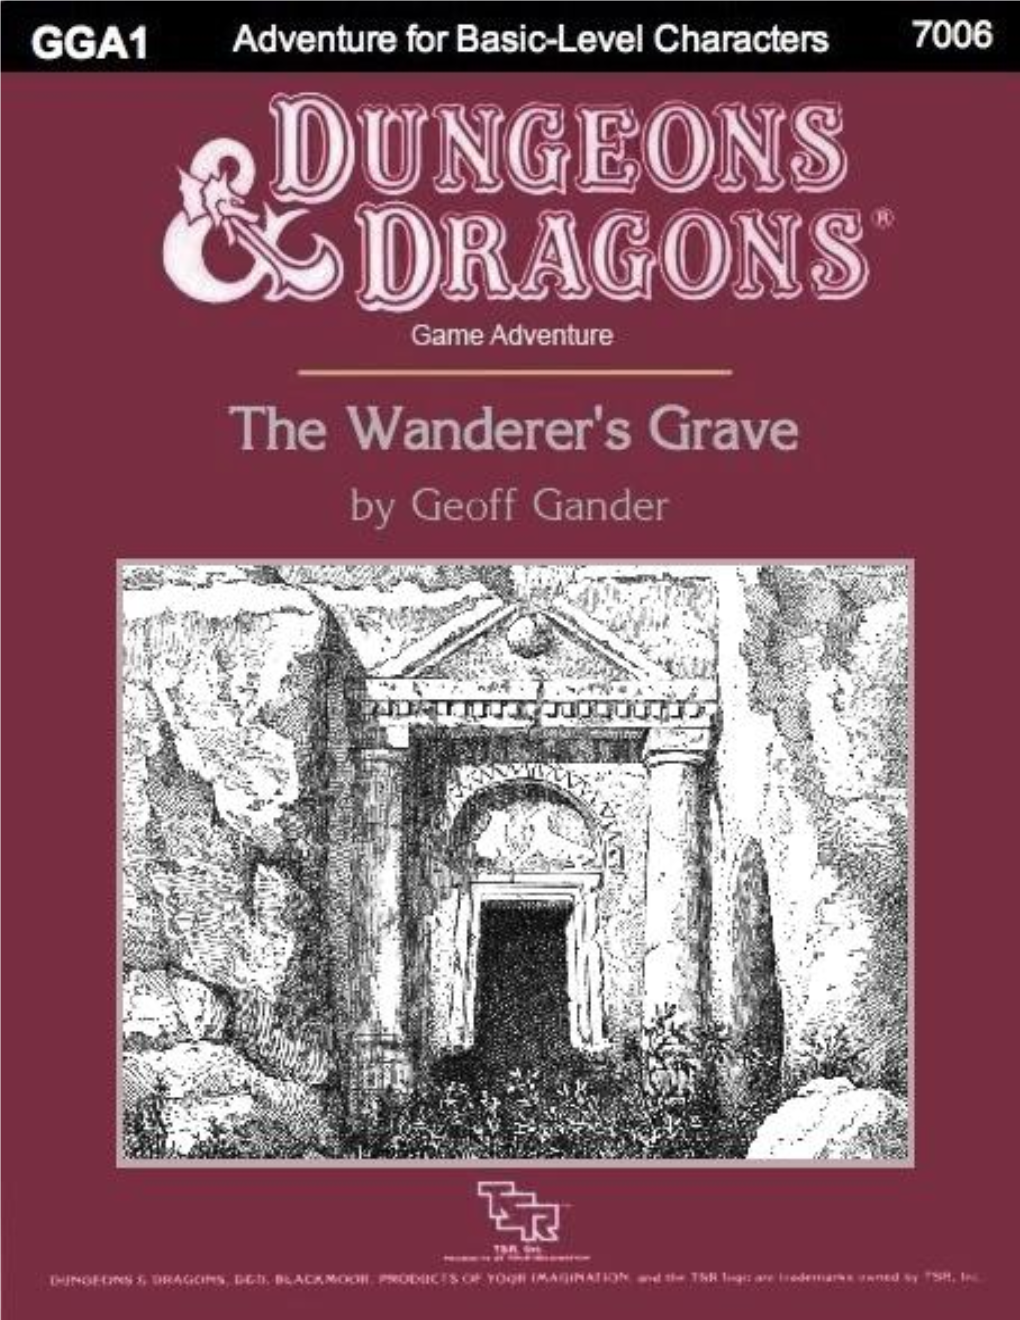 The Wanderer's Grave